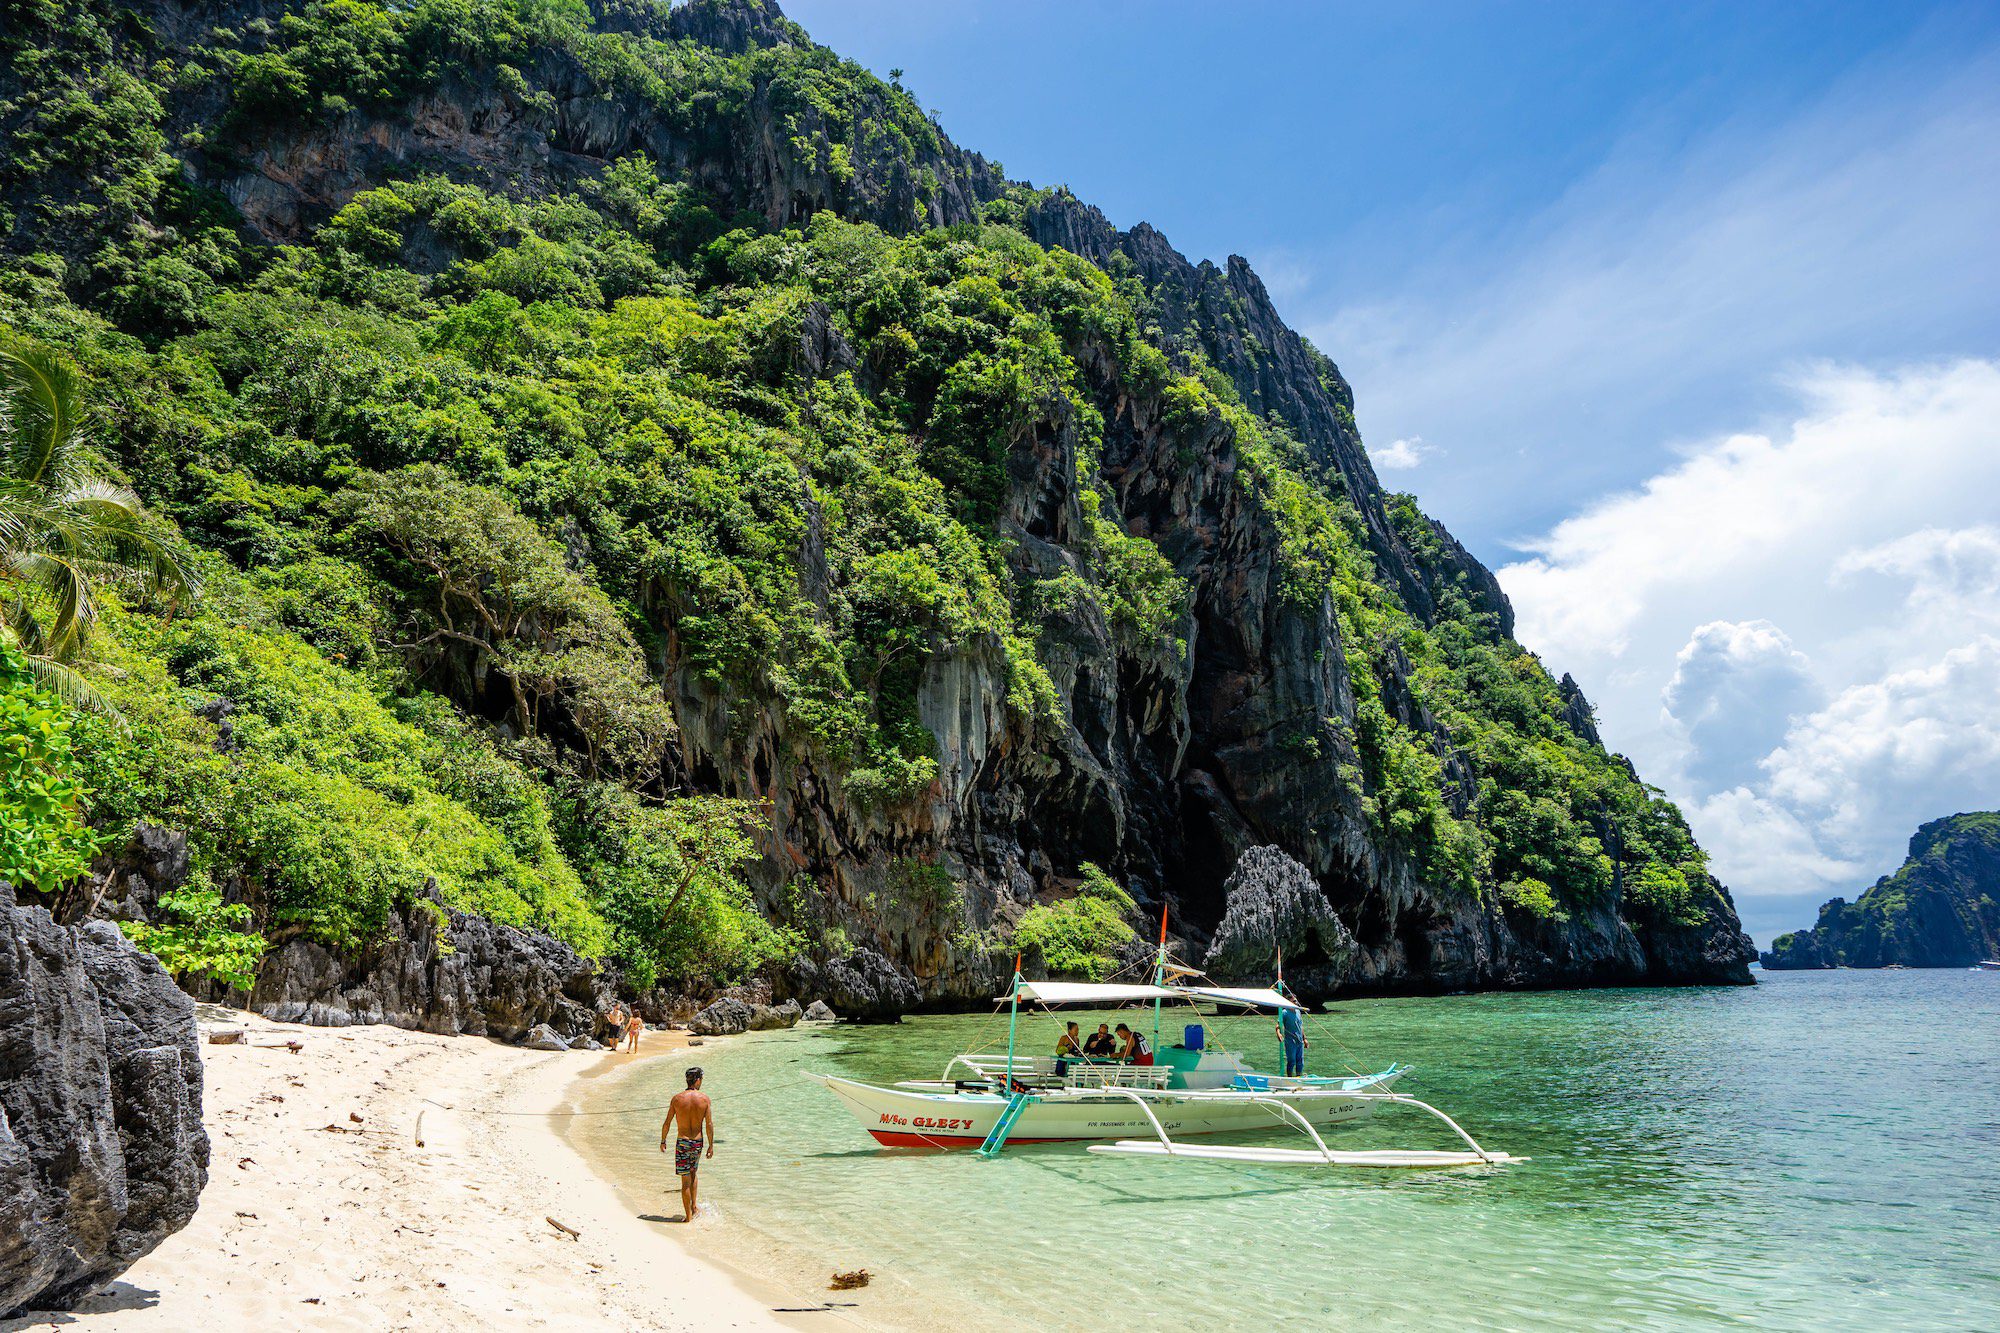 A tropical beach with clear blue skies, a limestone cliff, lush foliage, a traditional boat, and a person walking on the white sand.